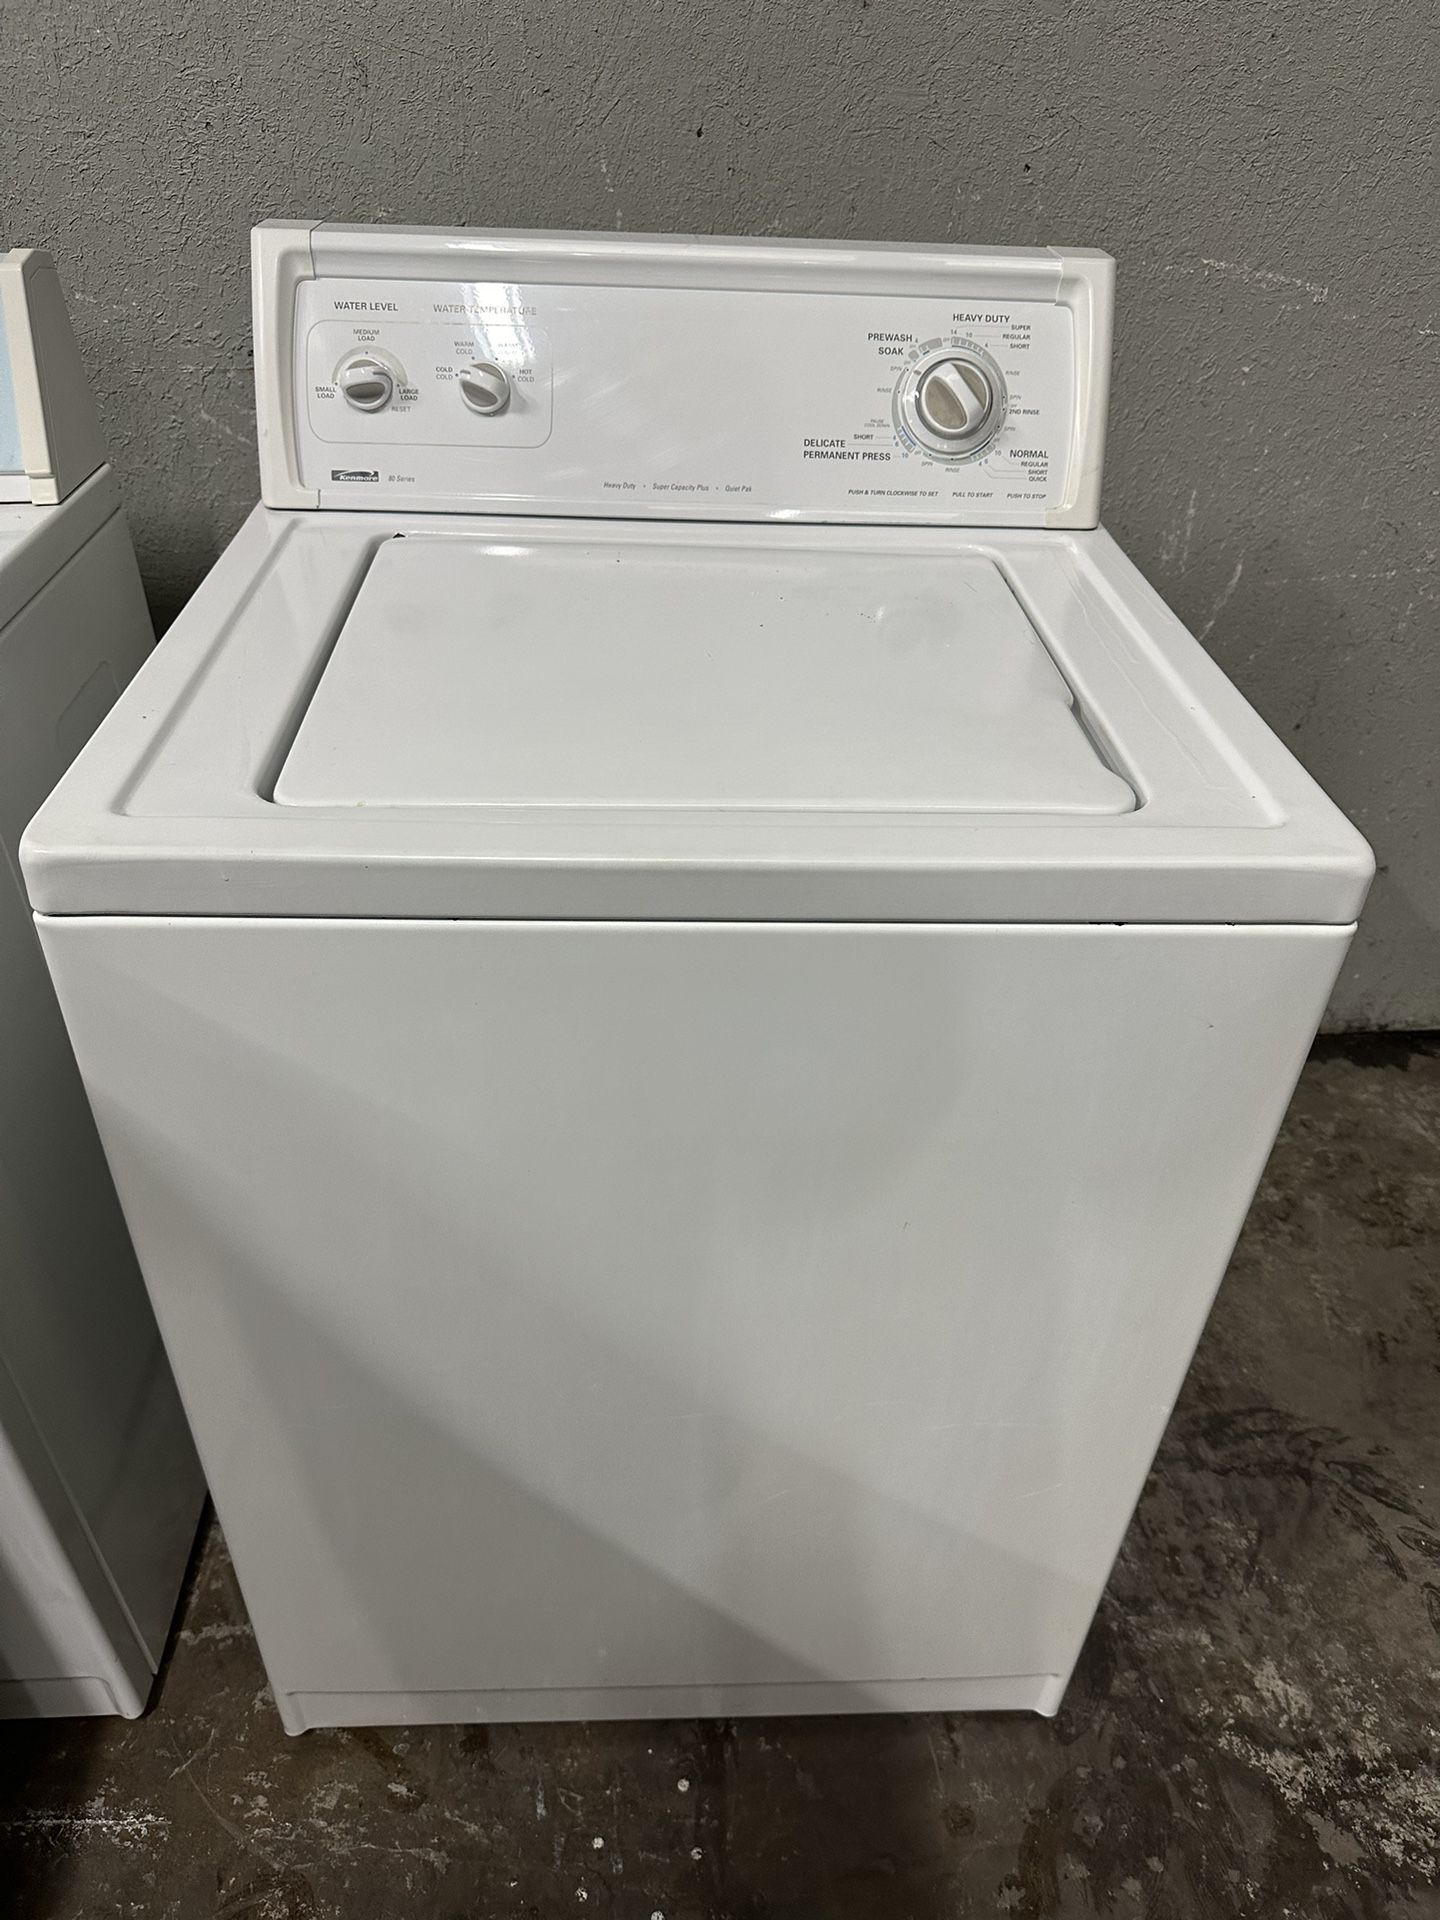 Kenmore washer Can deliver